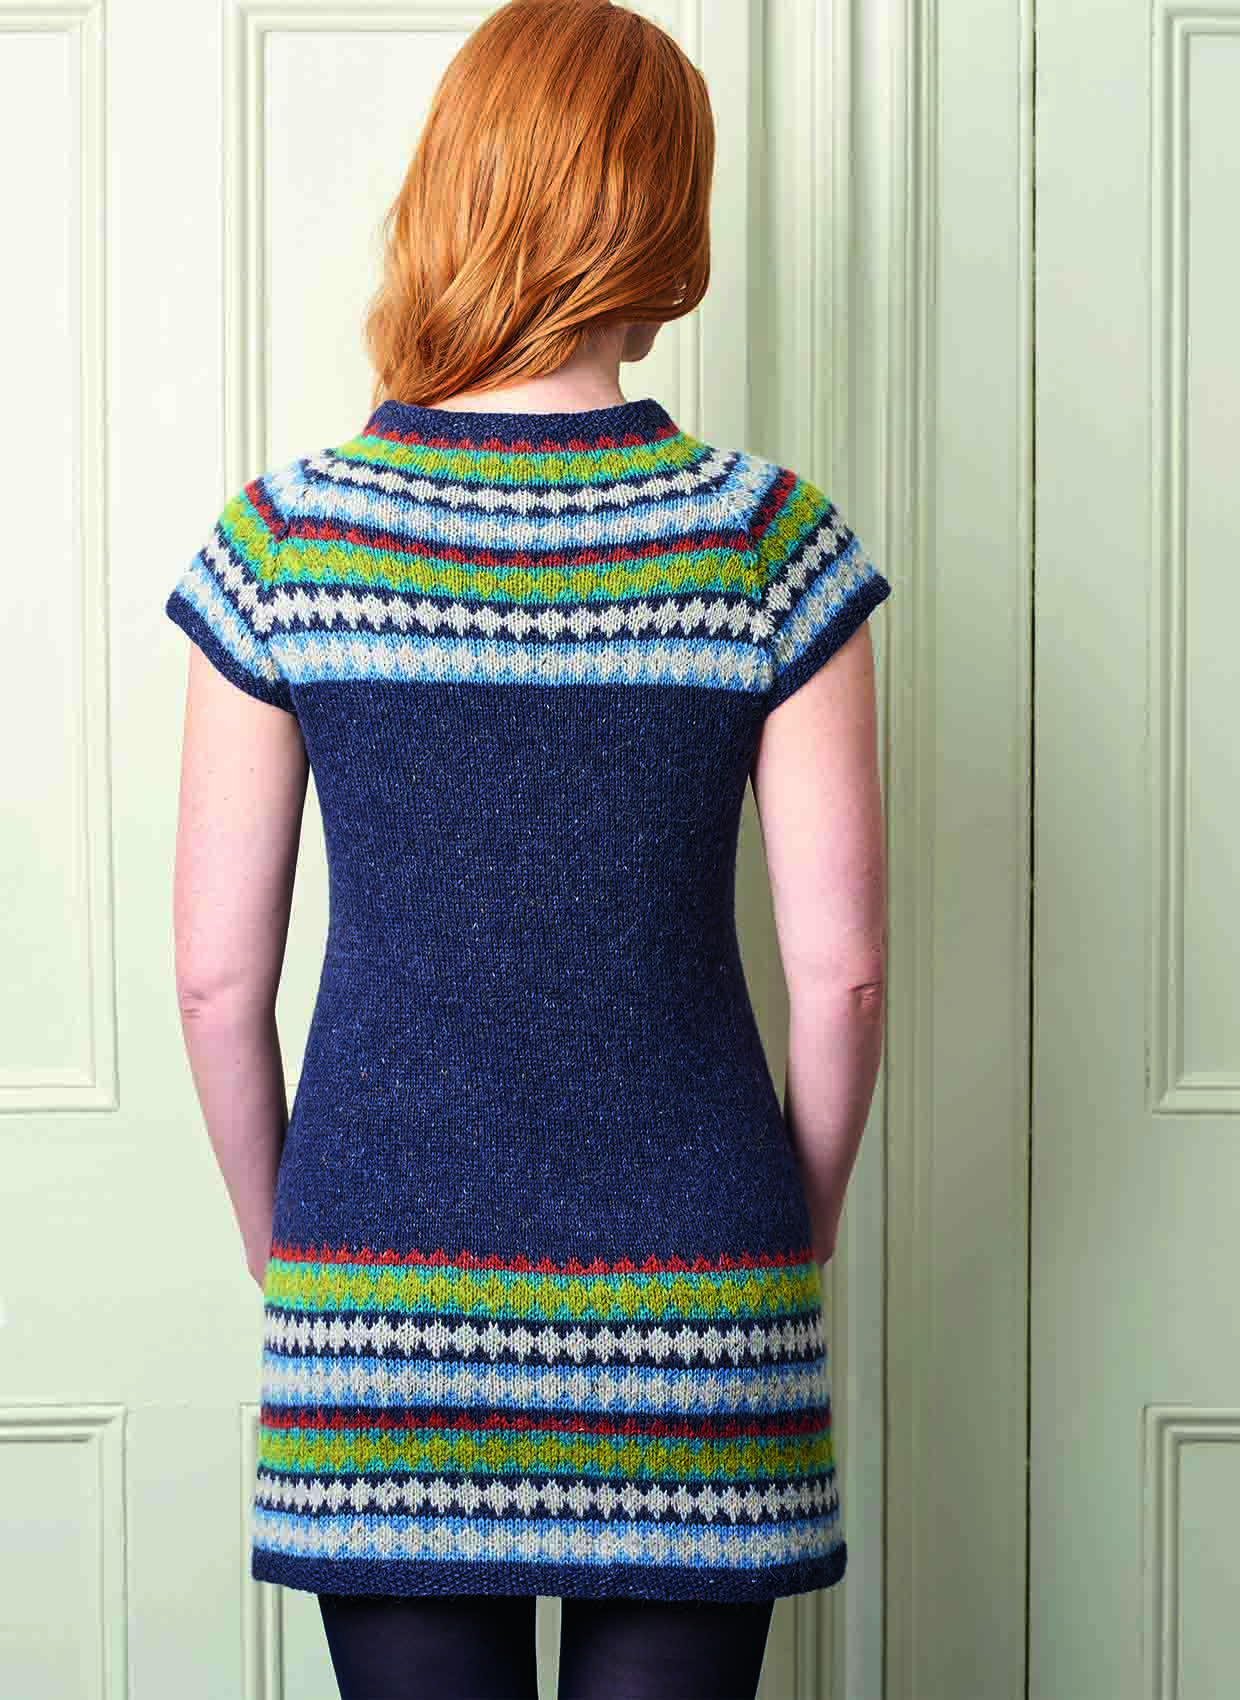 Lady has her back to us so you can see the shaping on the waist at the back of the knitted dress